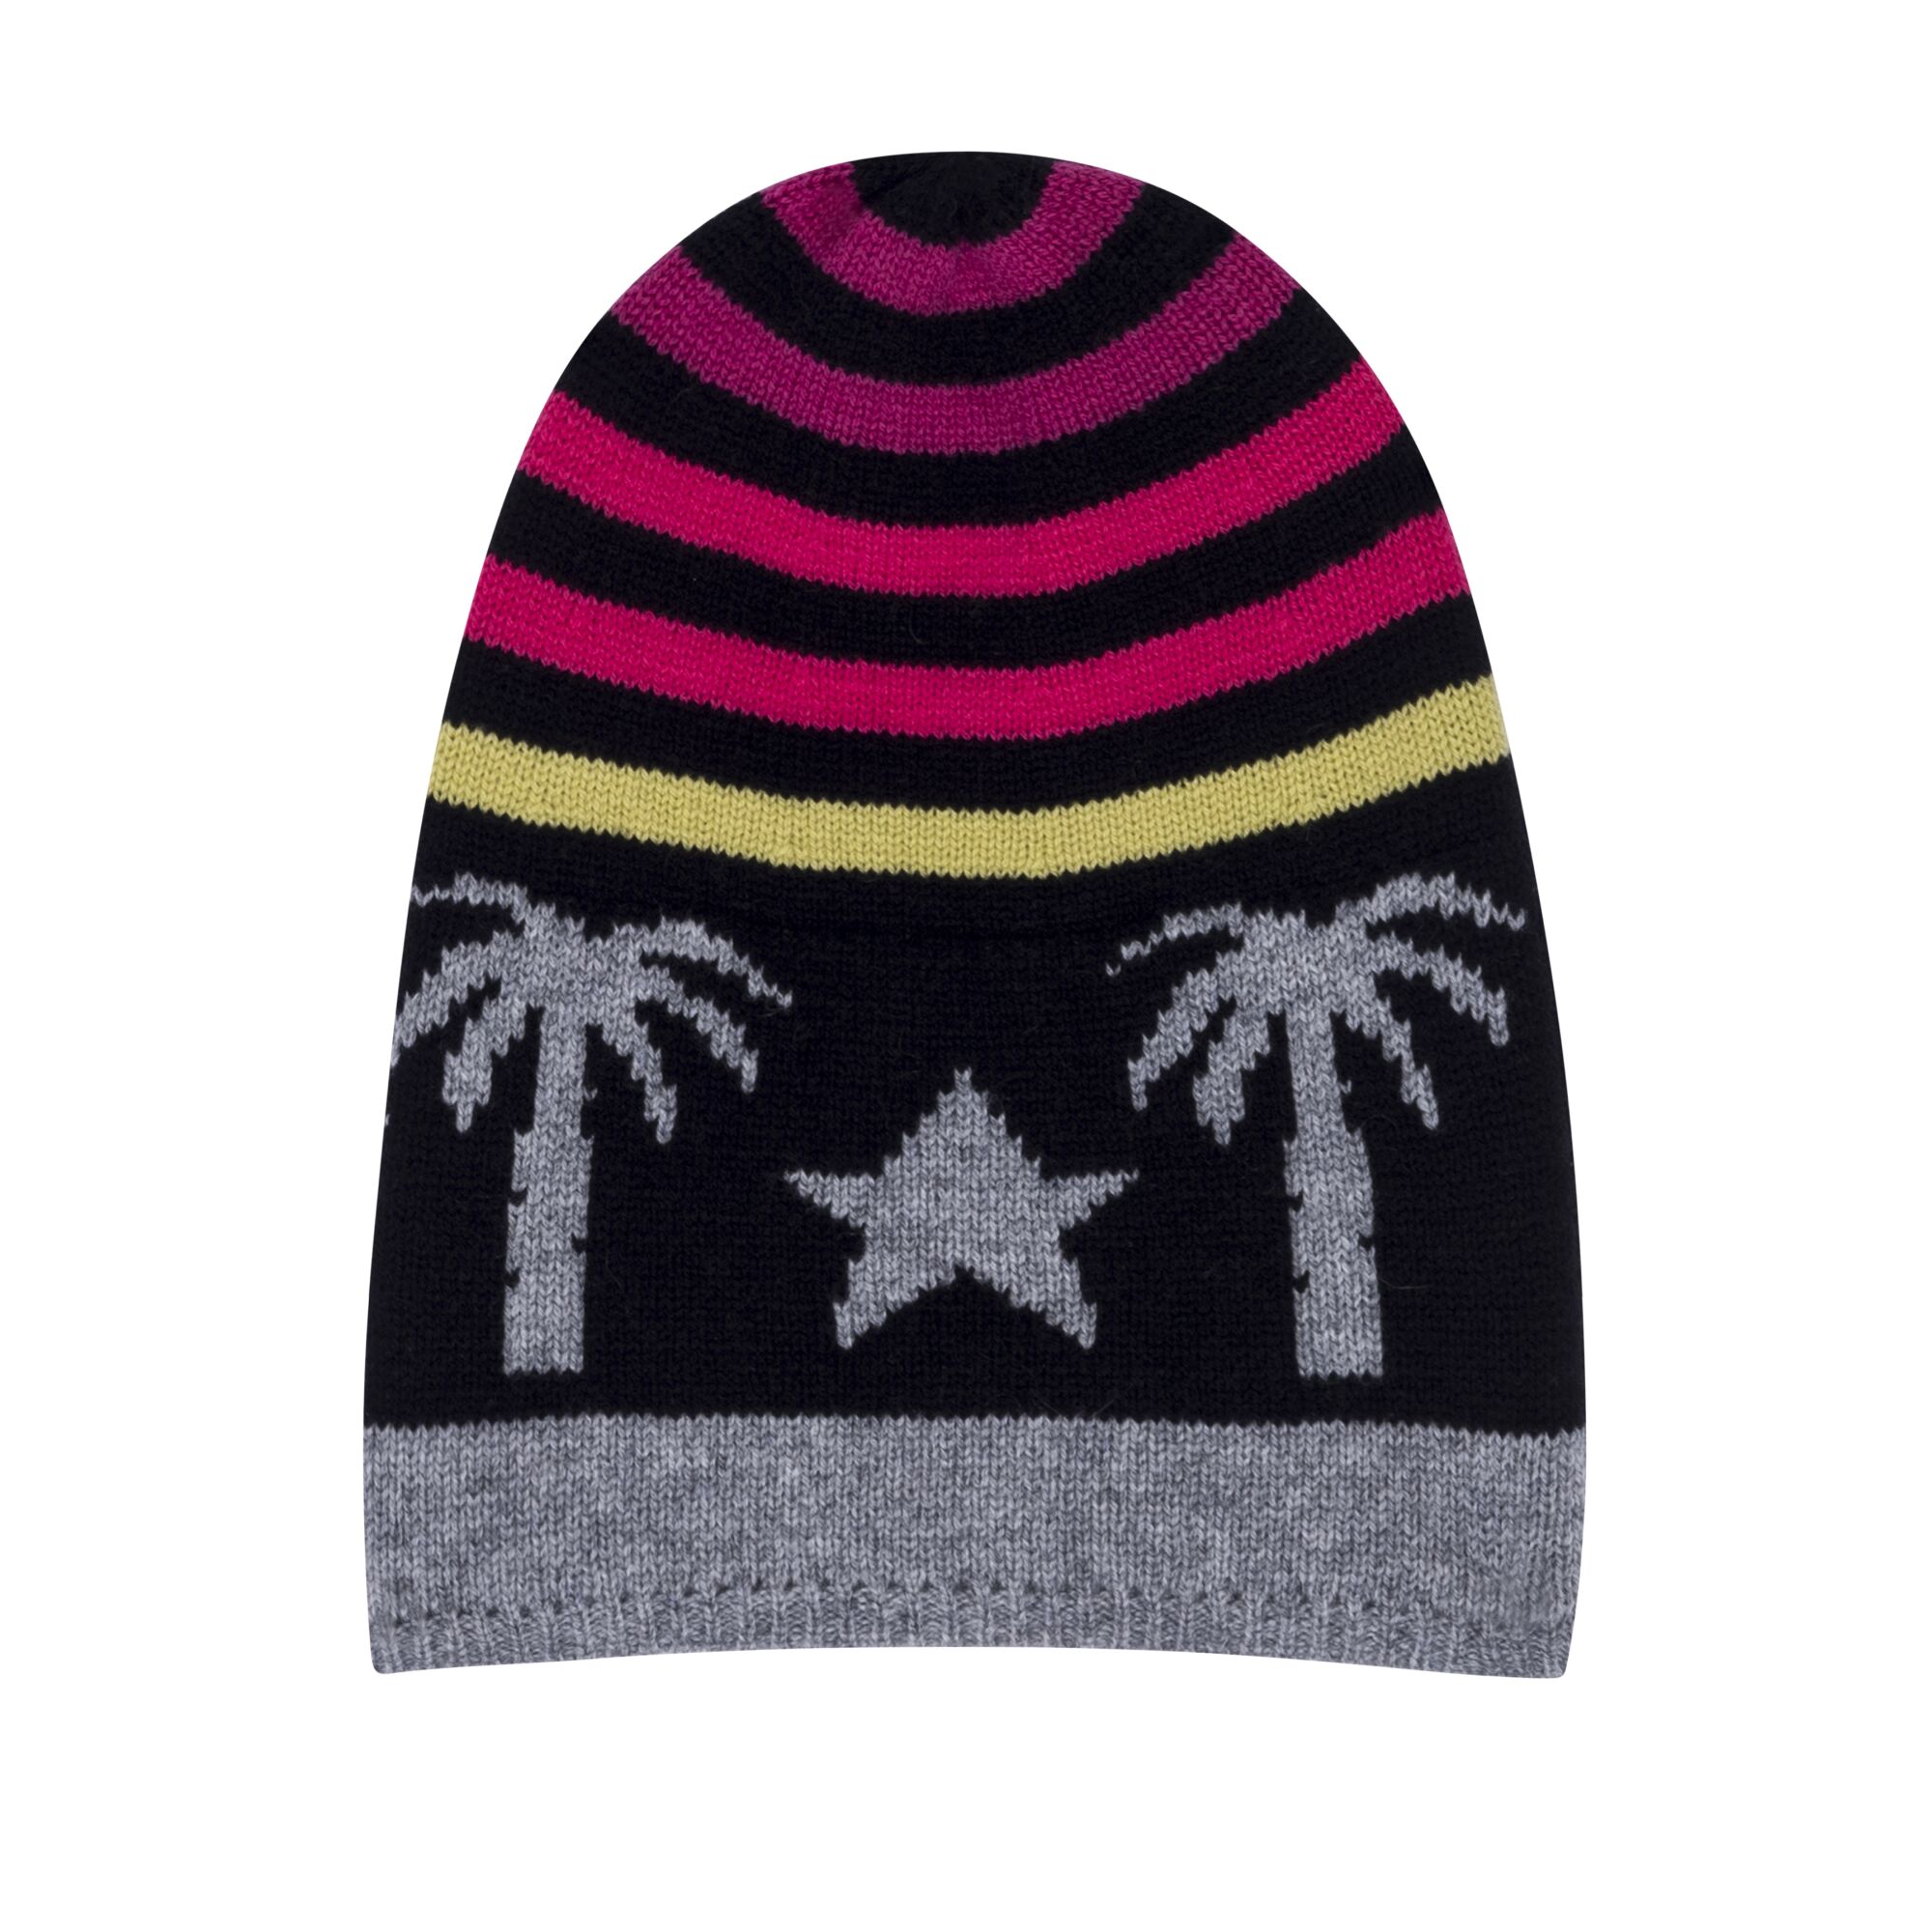 A striped beanie with two palm trees and a star.